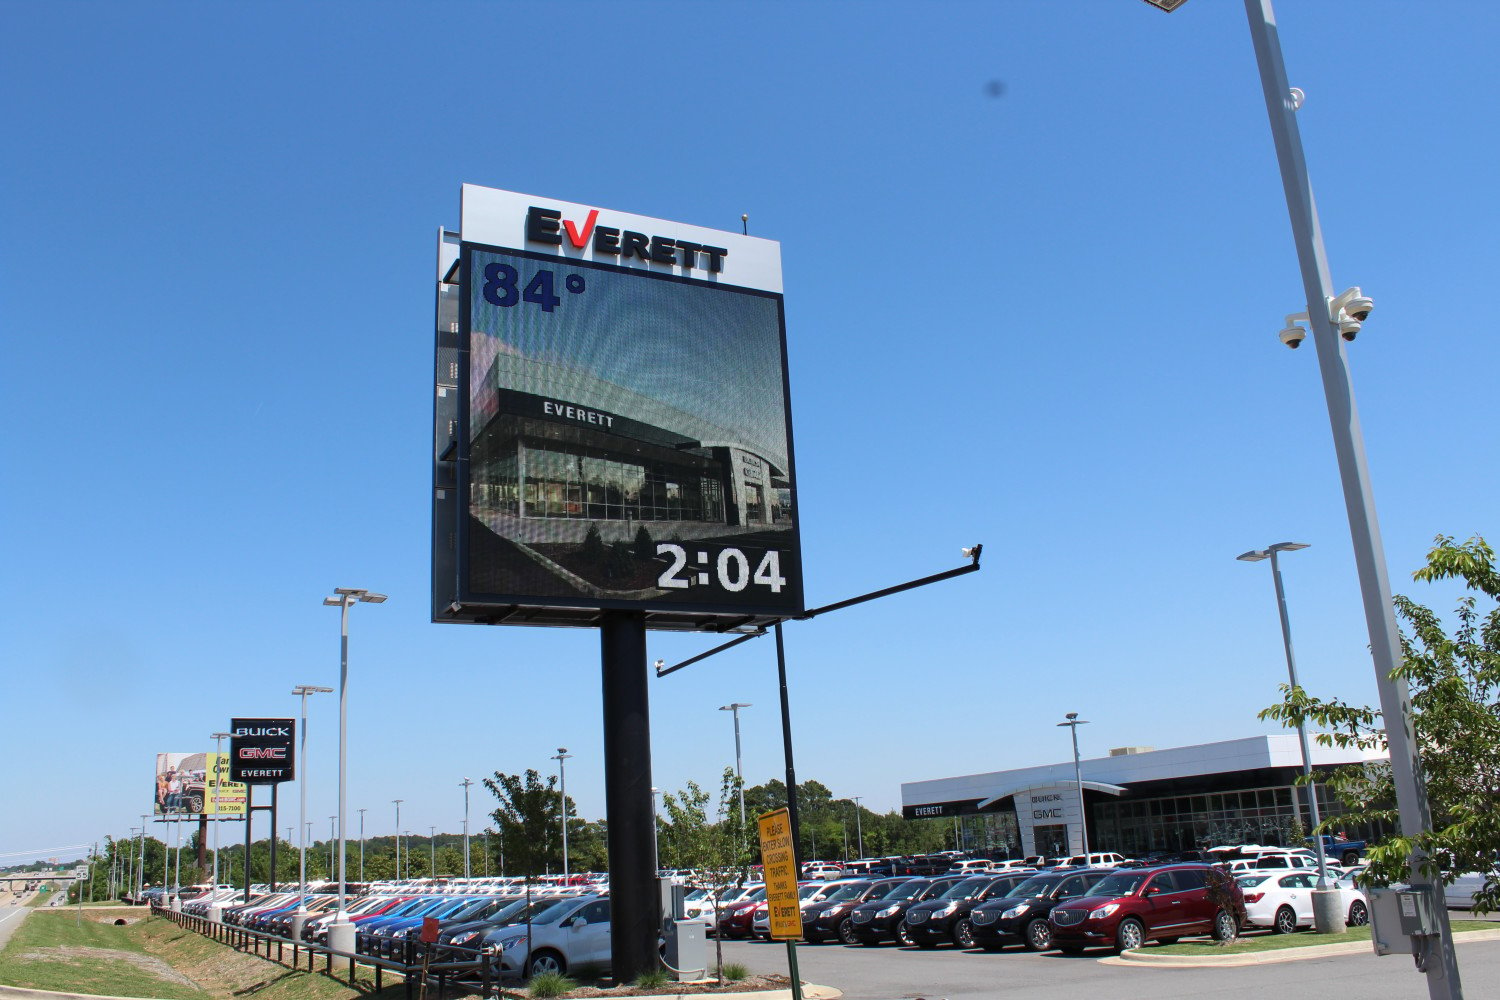 20'x20' 2 sided 19mm Watchfire Display with lighted reverse lit channel letters. Located at Everett Buick GMC in Bryant, Arkansas.